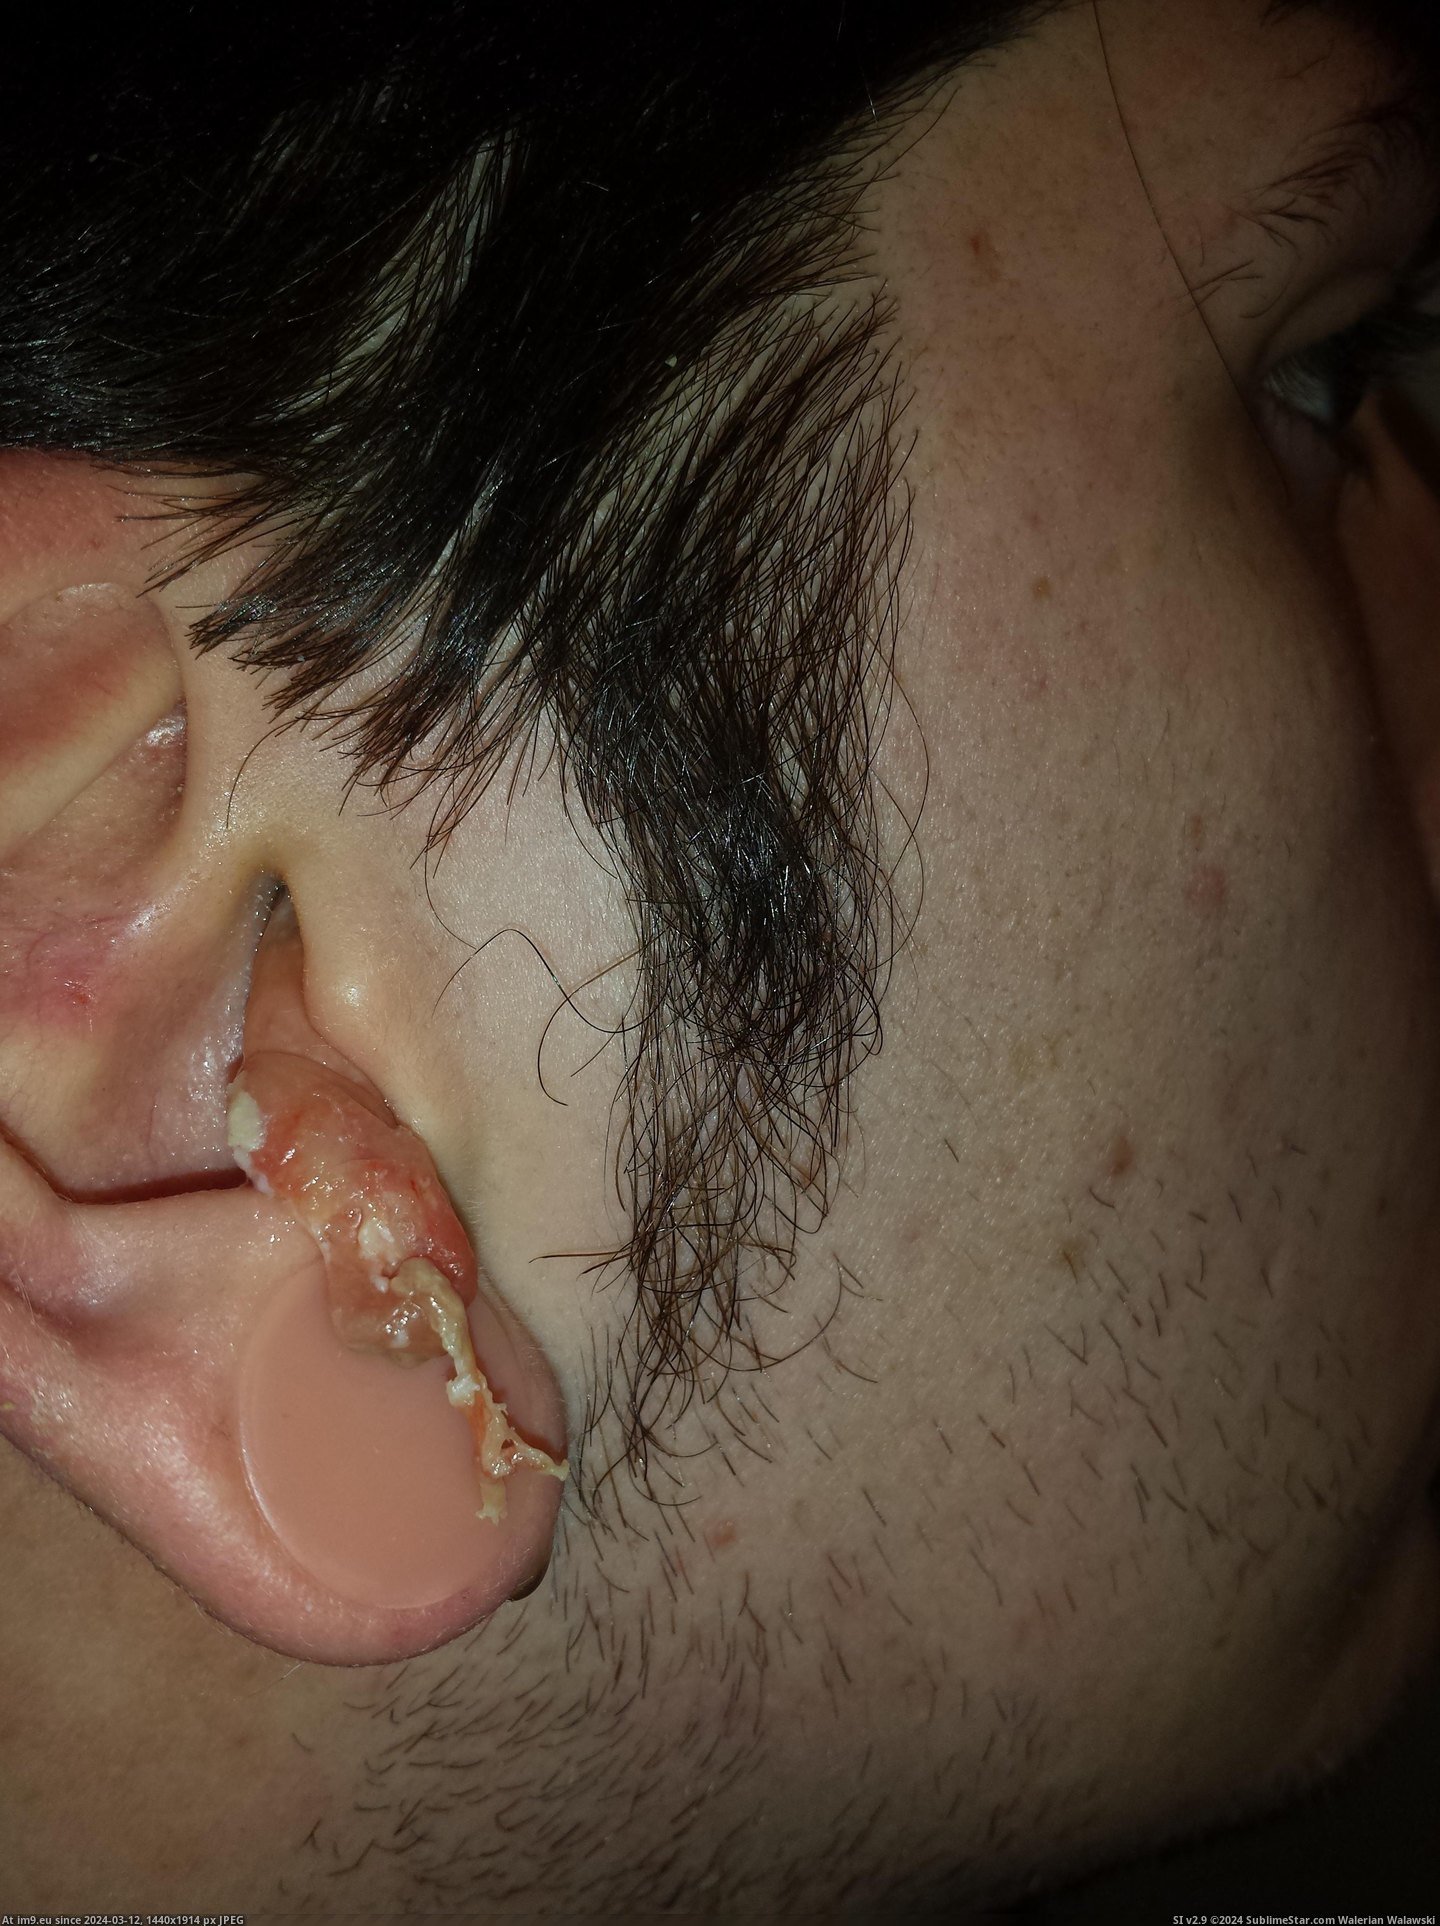 #Wtf #Ear #Infection #Crazy [Wtf] My crazy ear infection 9 Pic. (Изображение из альбом My r/WTF favs))